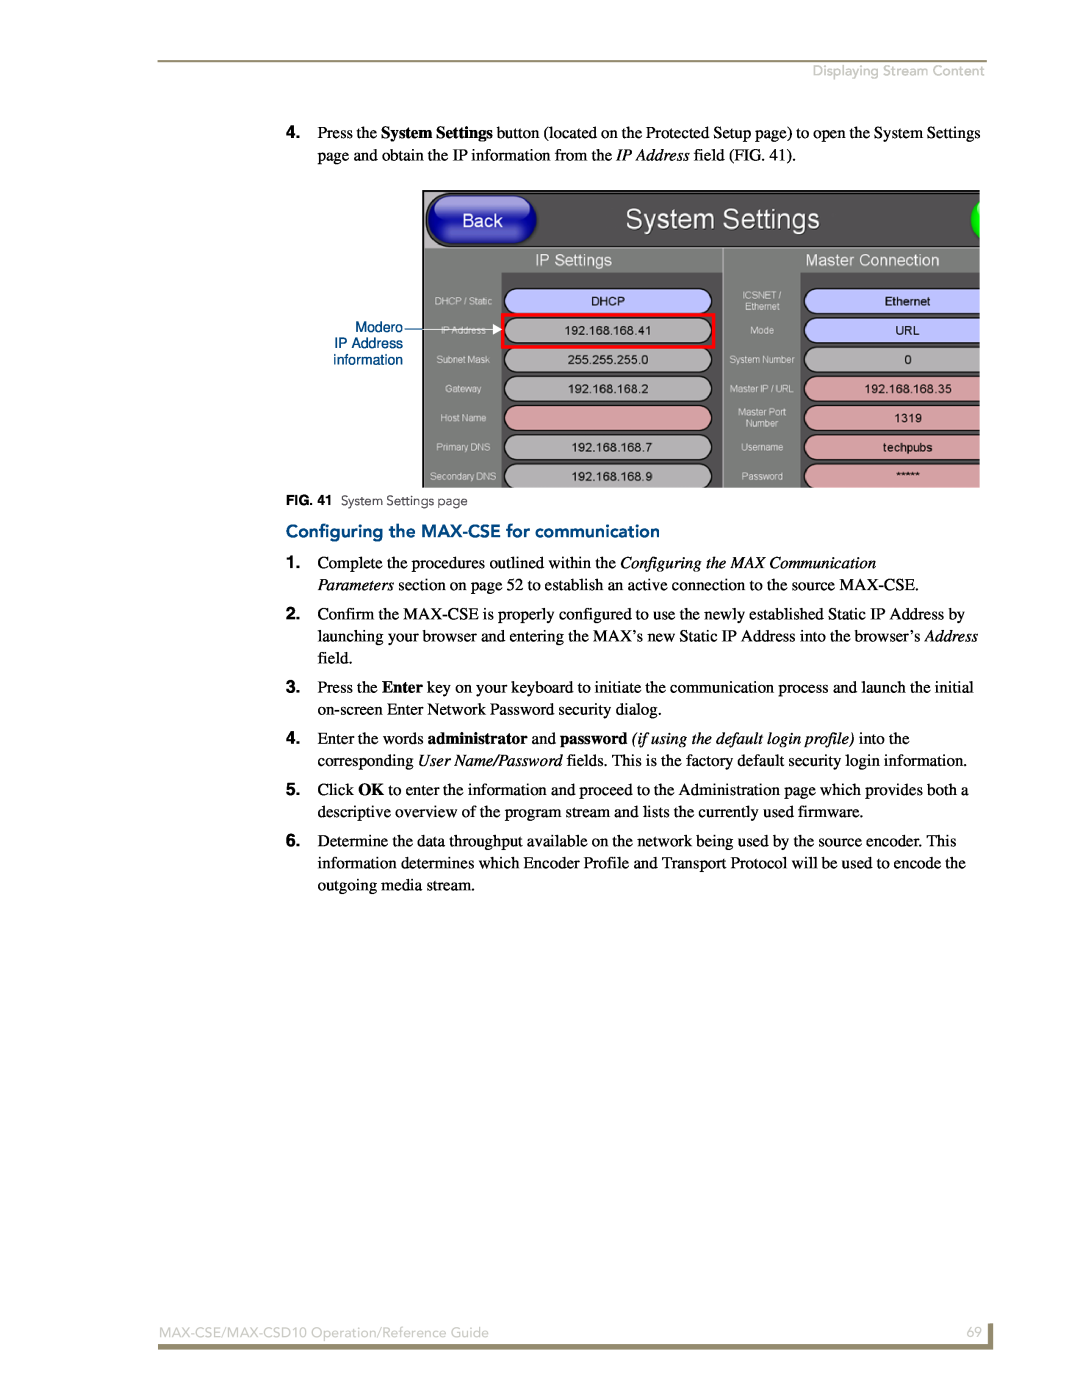 AMX MAX-CSD10 manual Configuring the MAX-CSEfor communication, Displaying Stream Content 